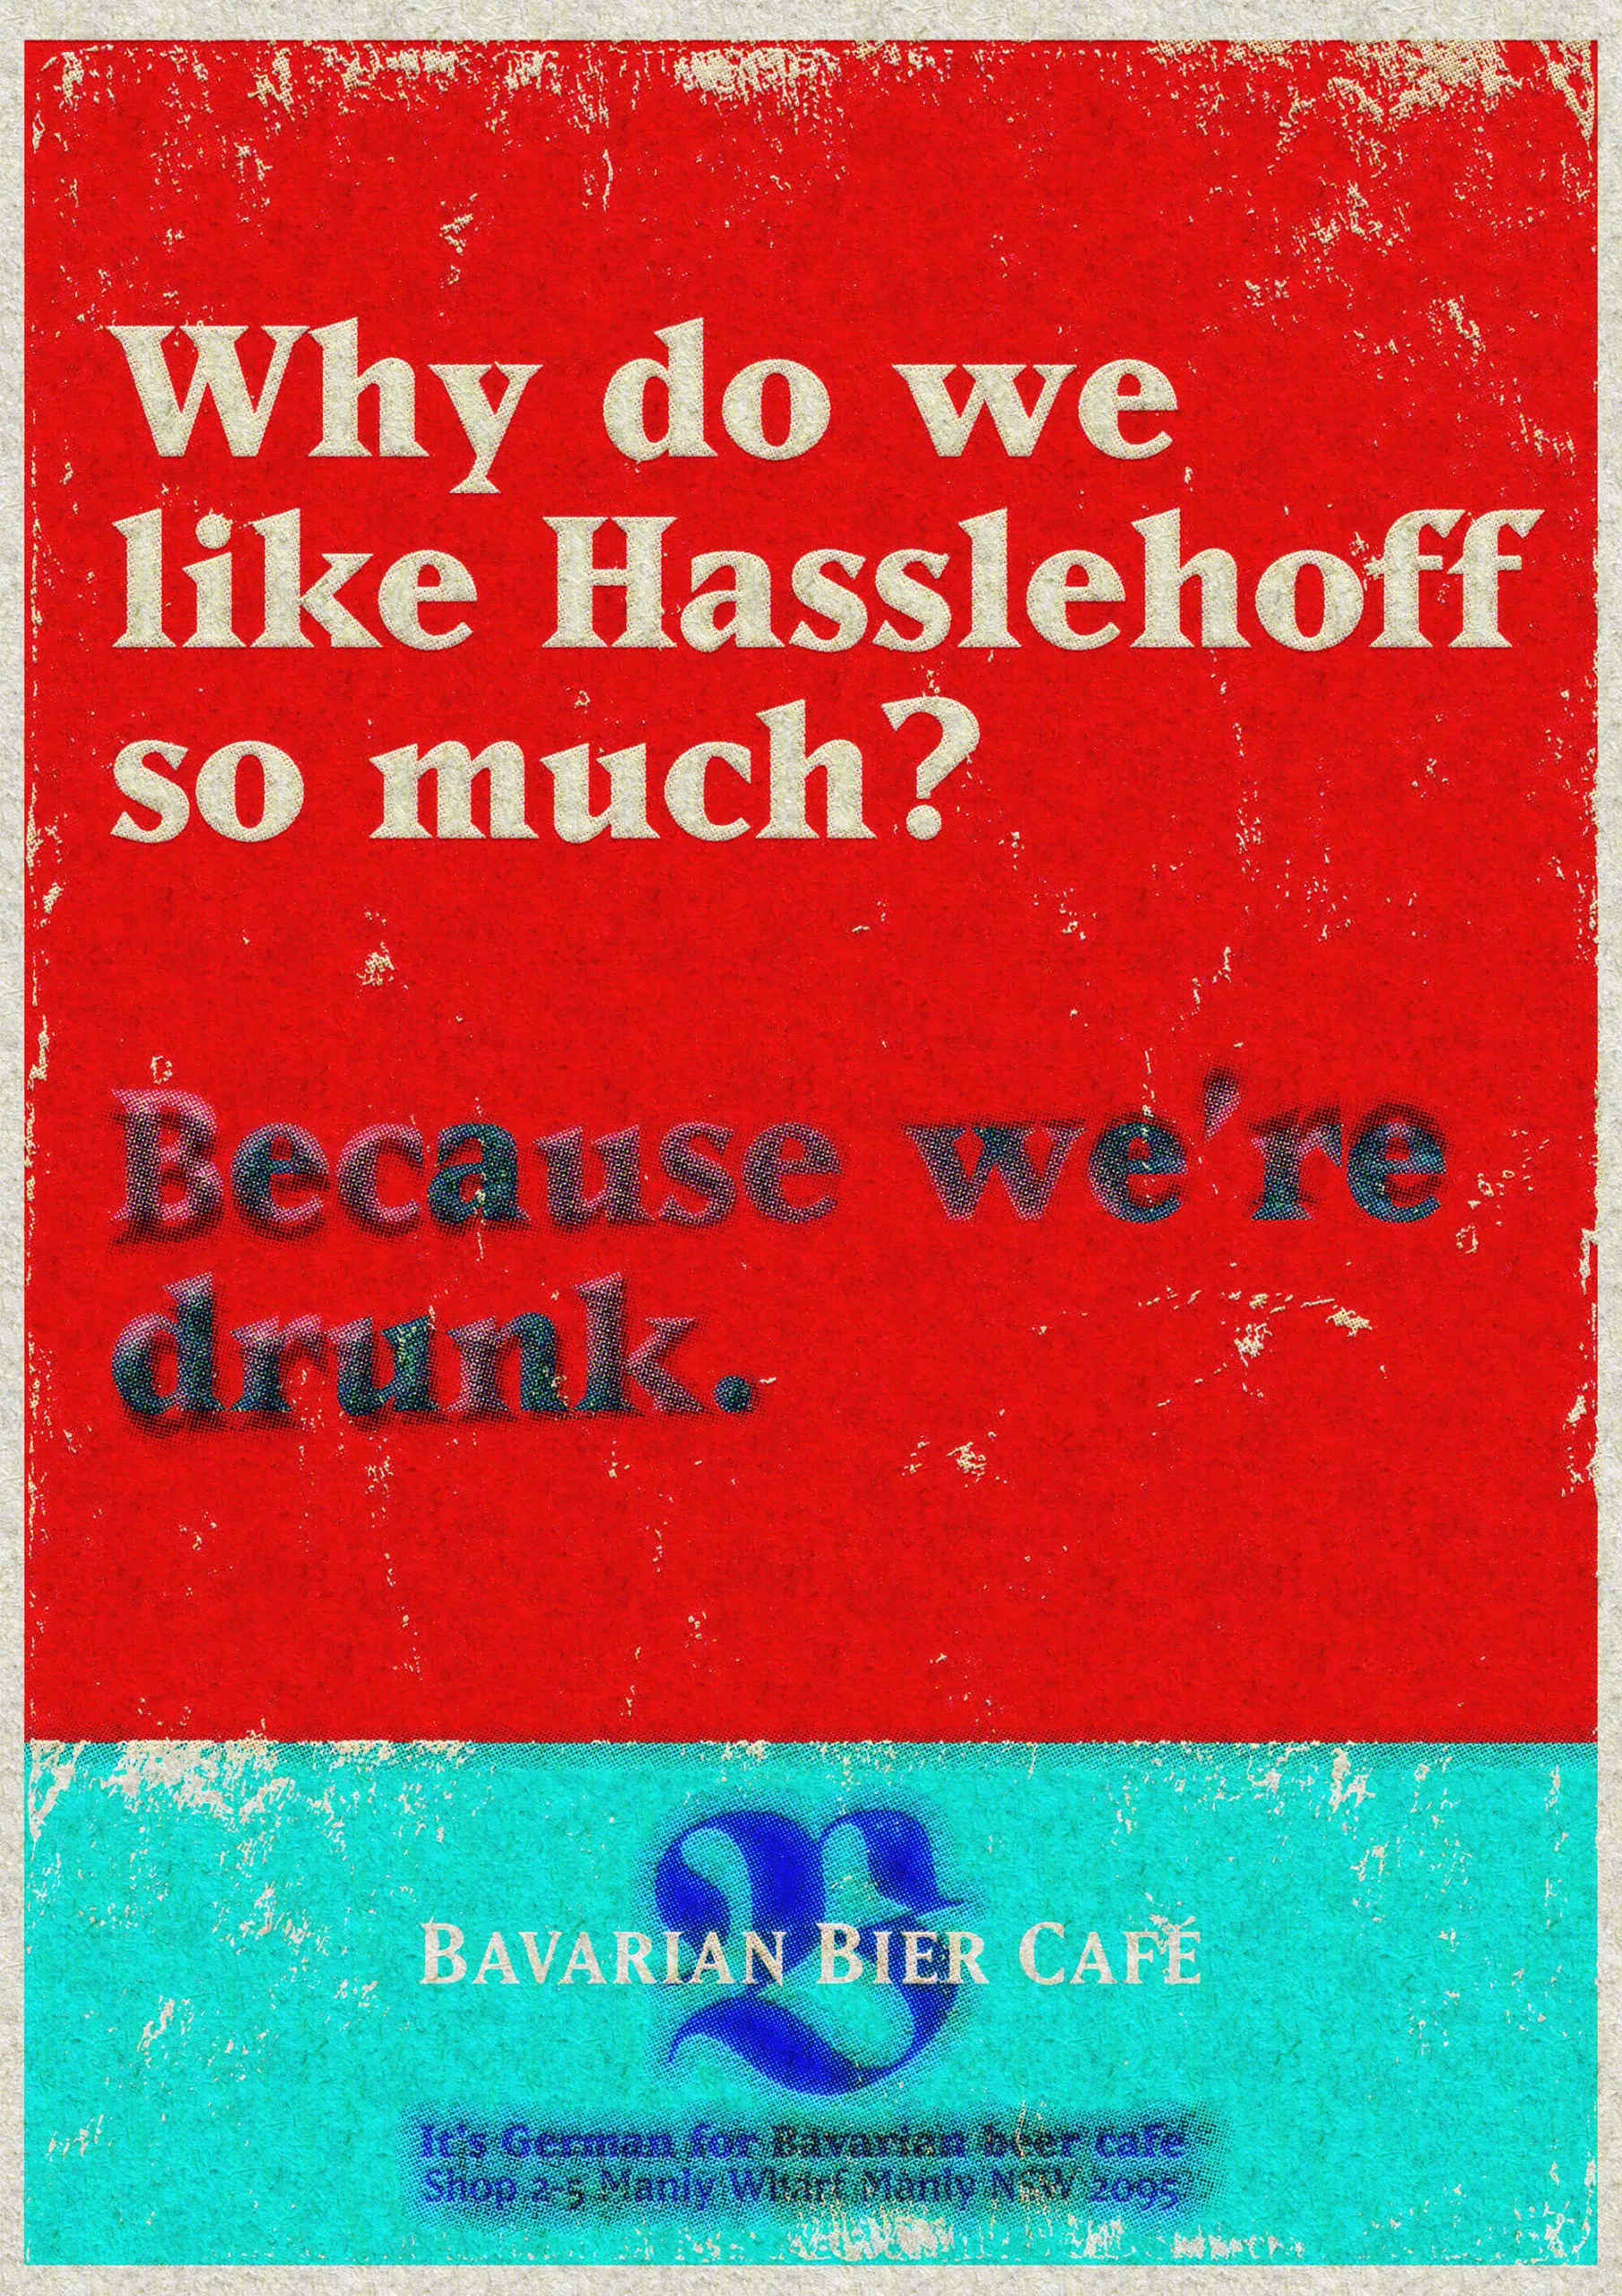 An advert for a Bavarian Bier Café that says "Why do we like Hasslehoff? Because we're drunk"